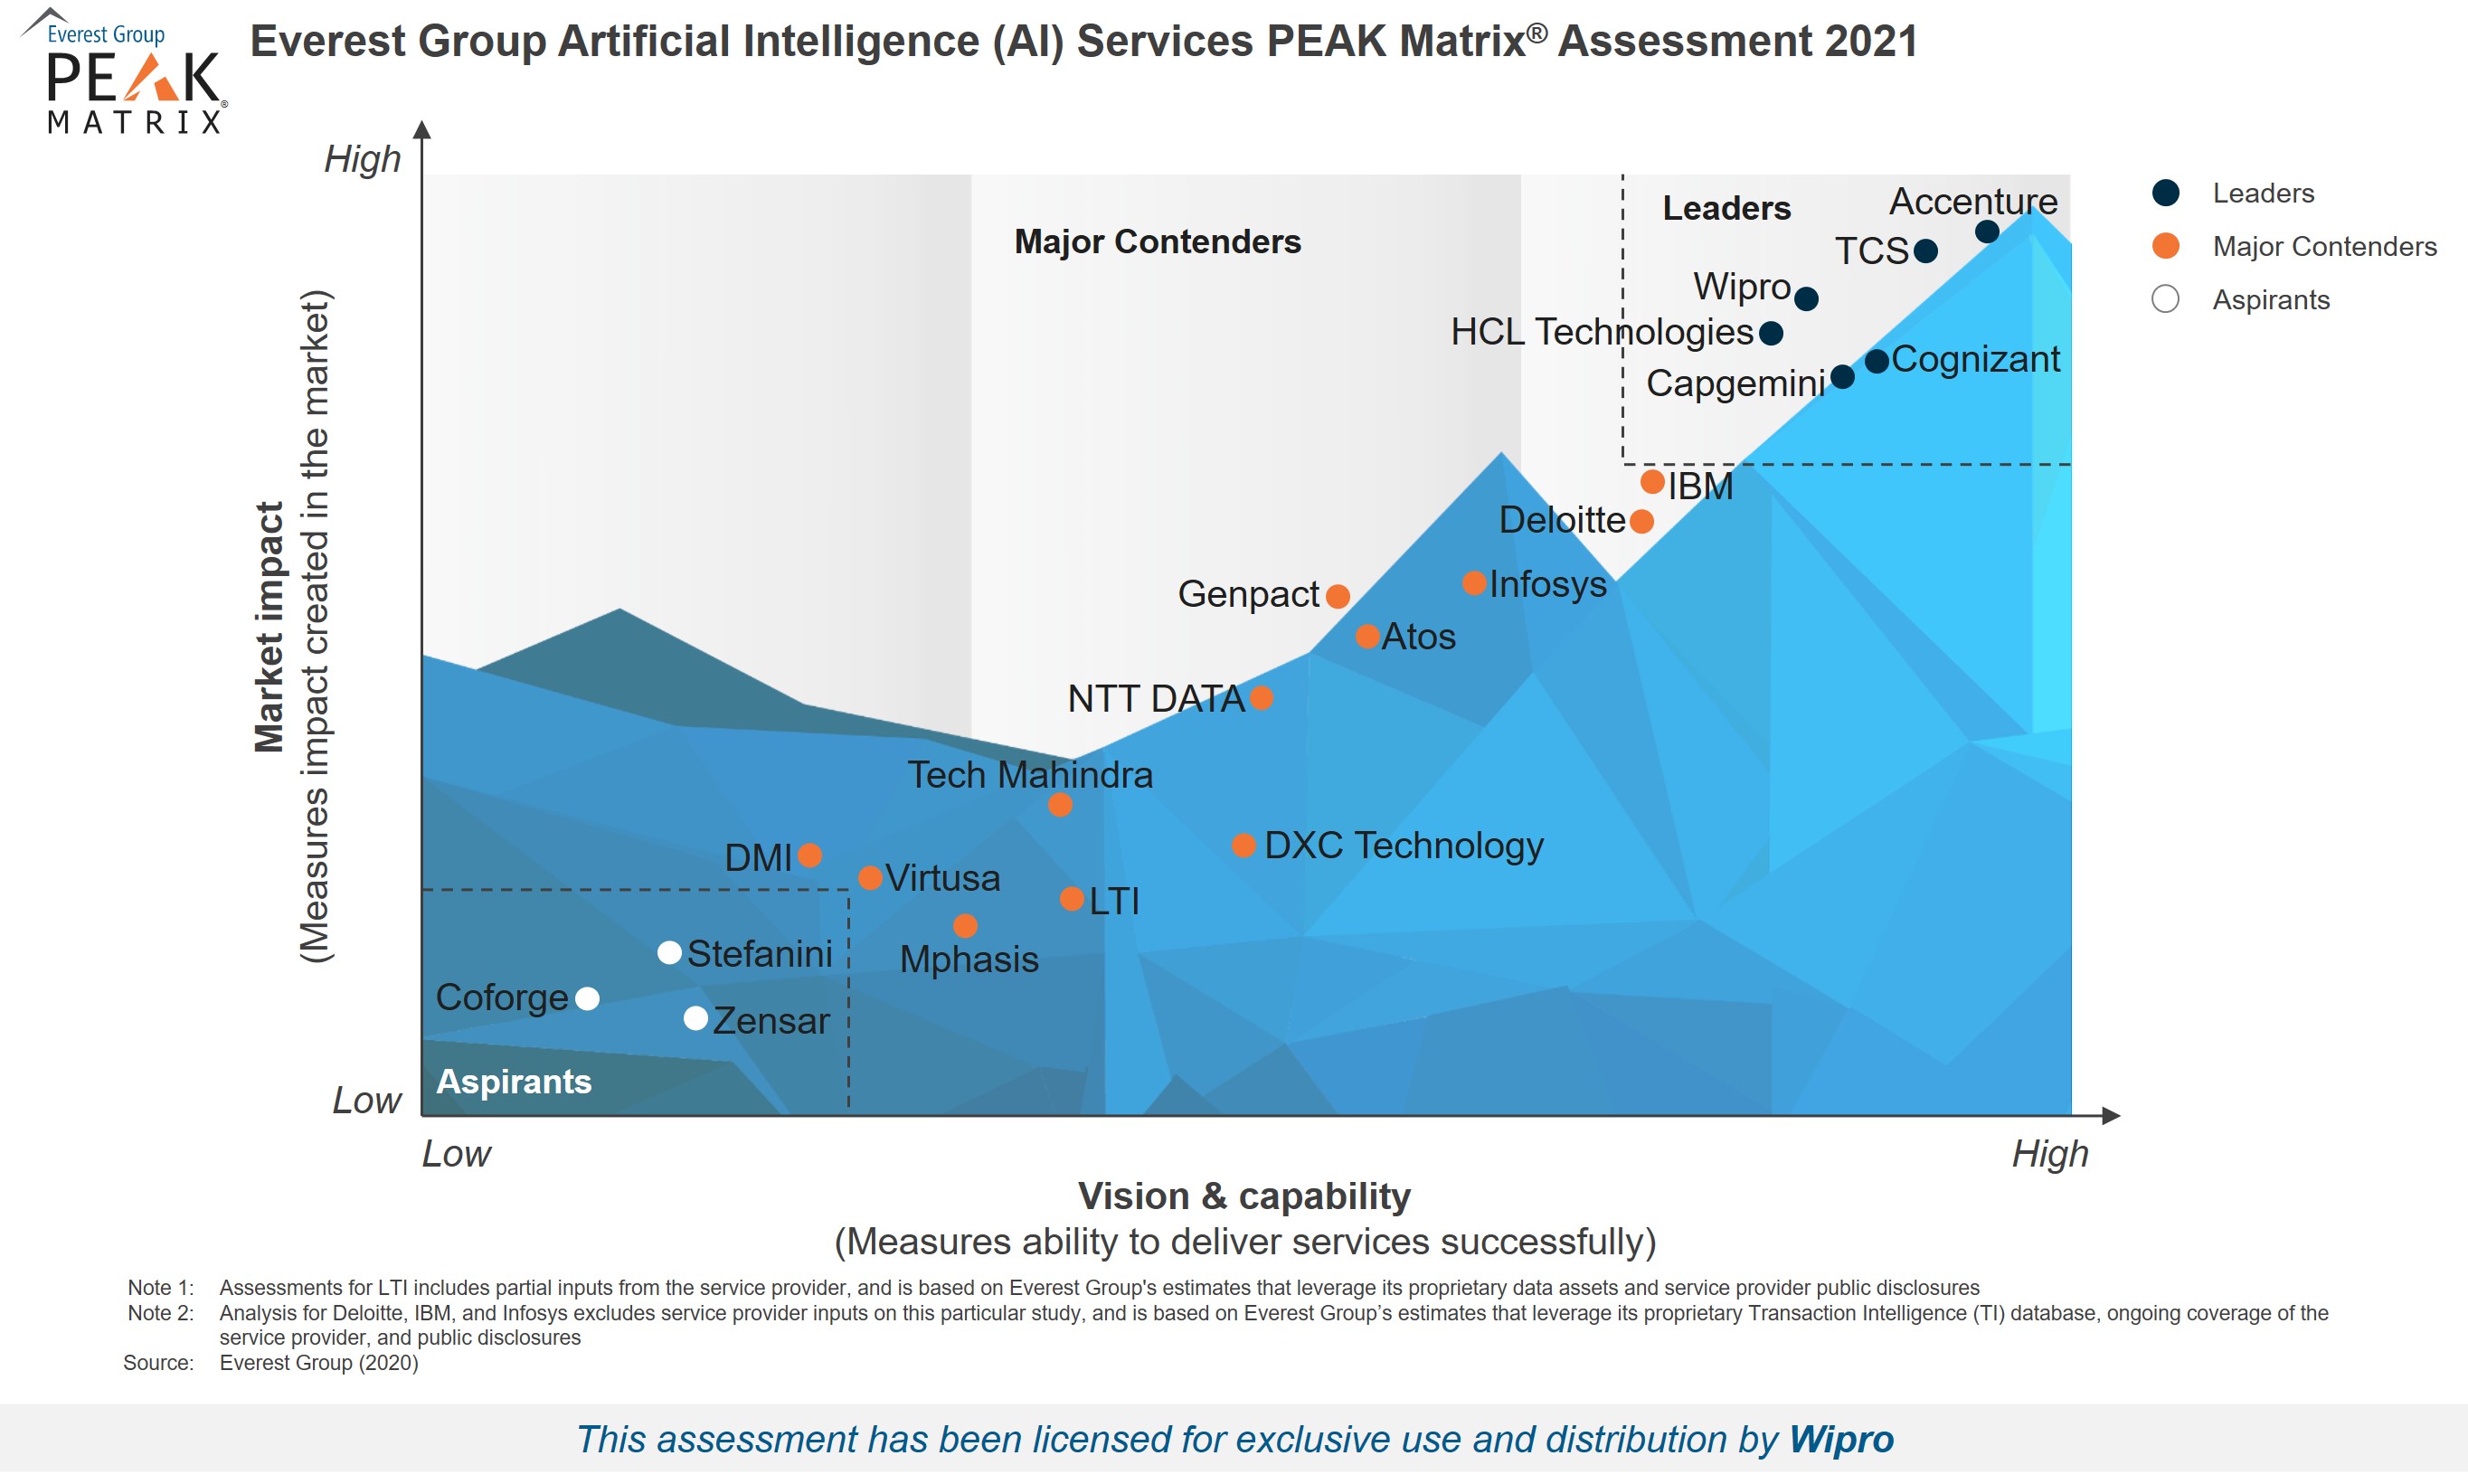 Wipro Positioned as Leader in Everest Group for AI Service Providers 